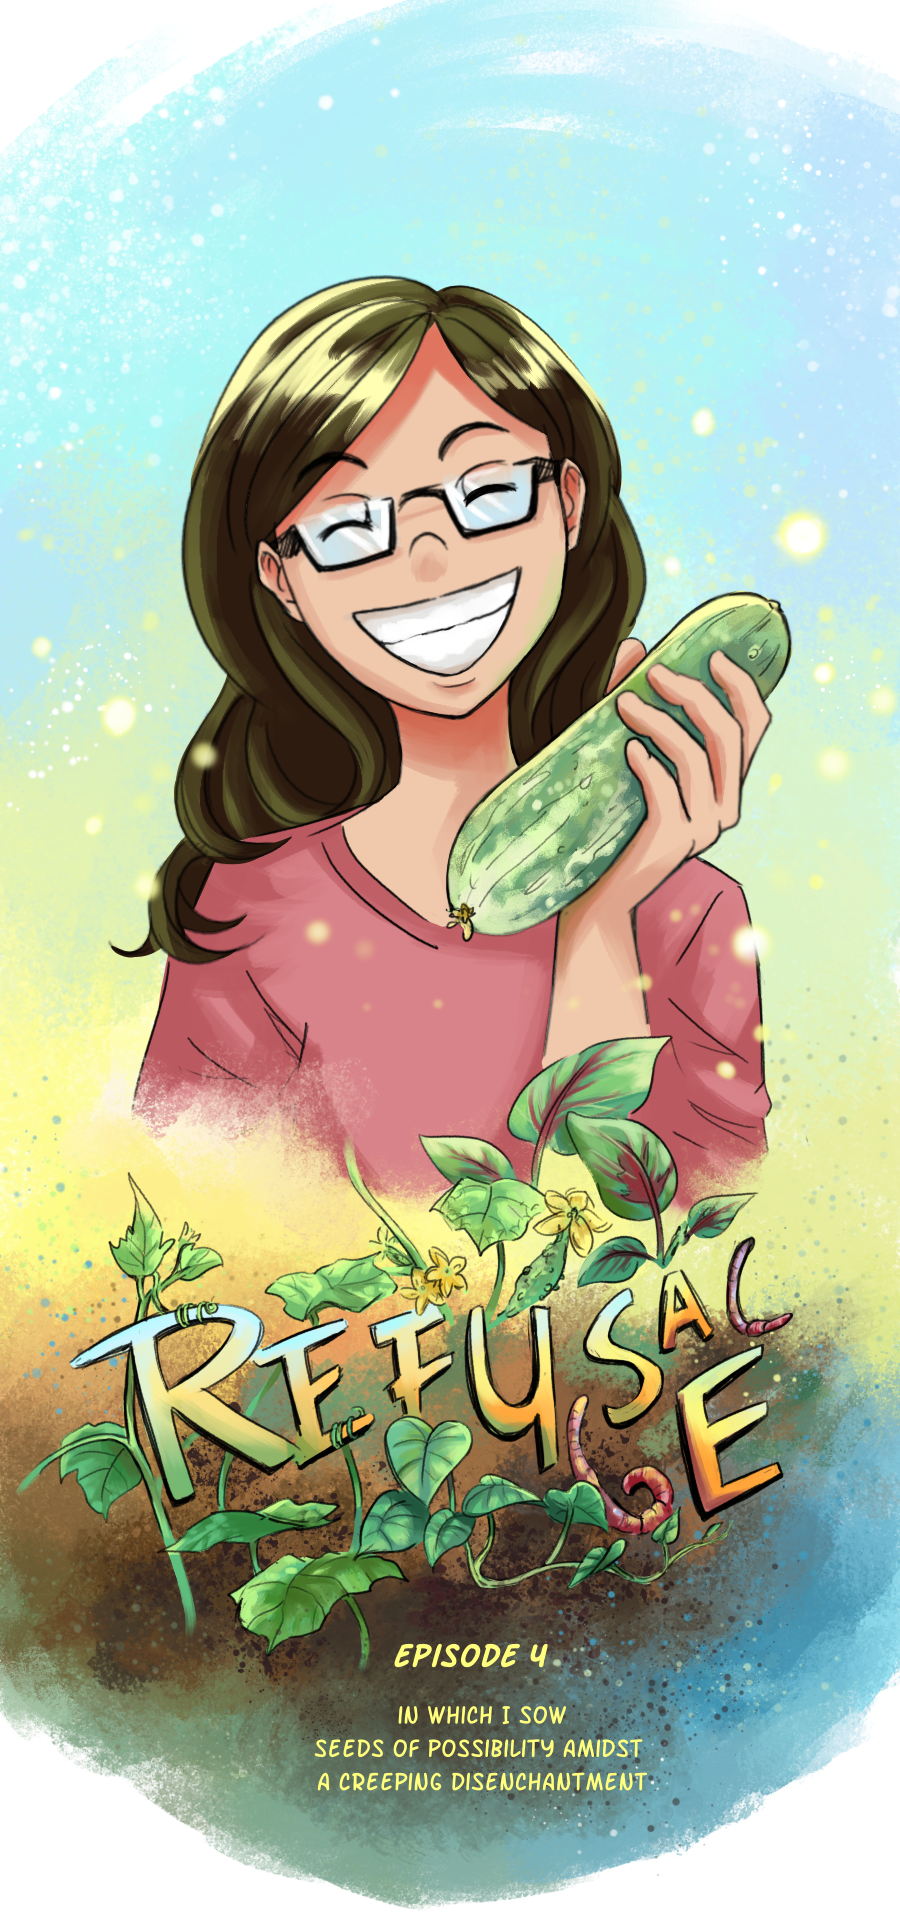 Title scene from episode 4 of my webcomic Refu(SE/SL/GE), showing me grinning broadly as I hold a freshly harvested cucumber in my hands.